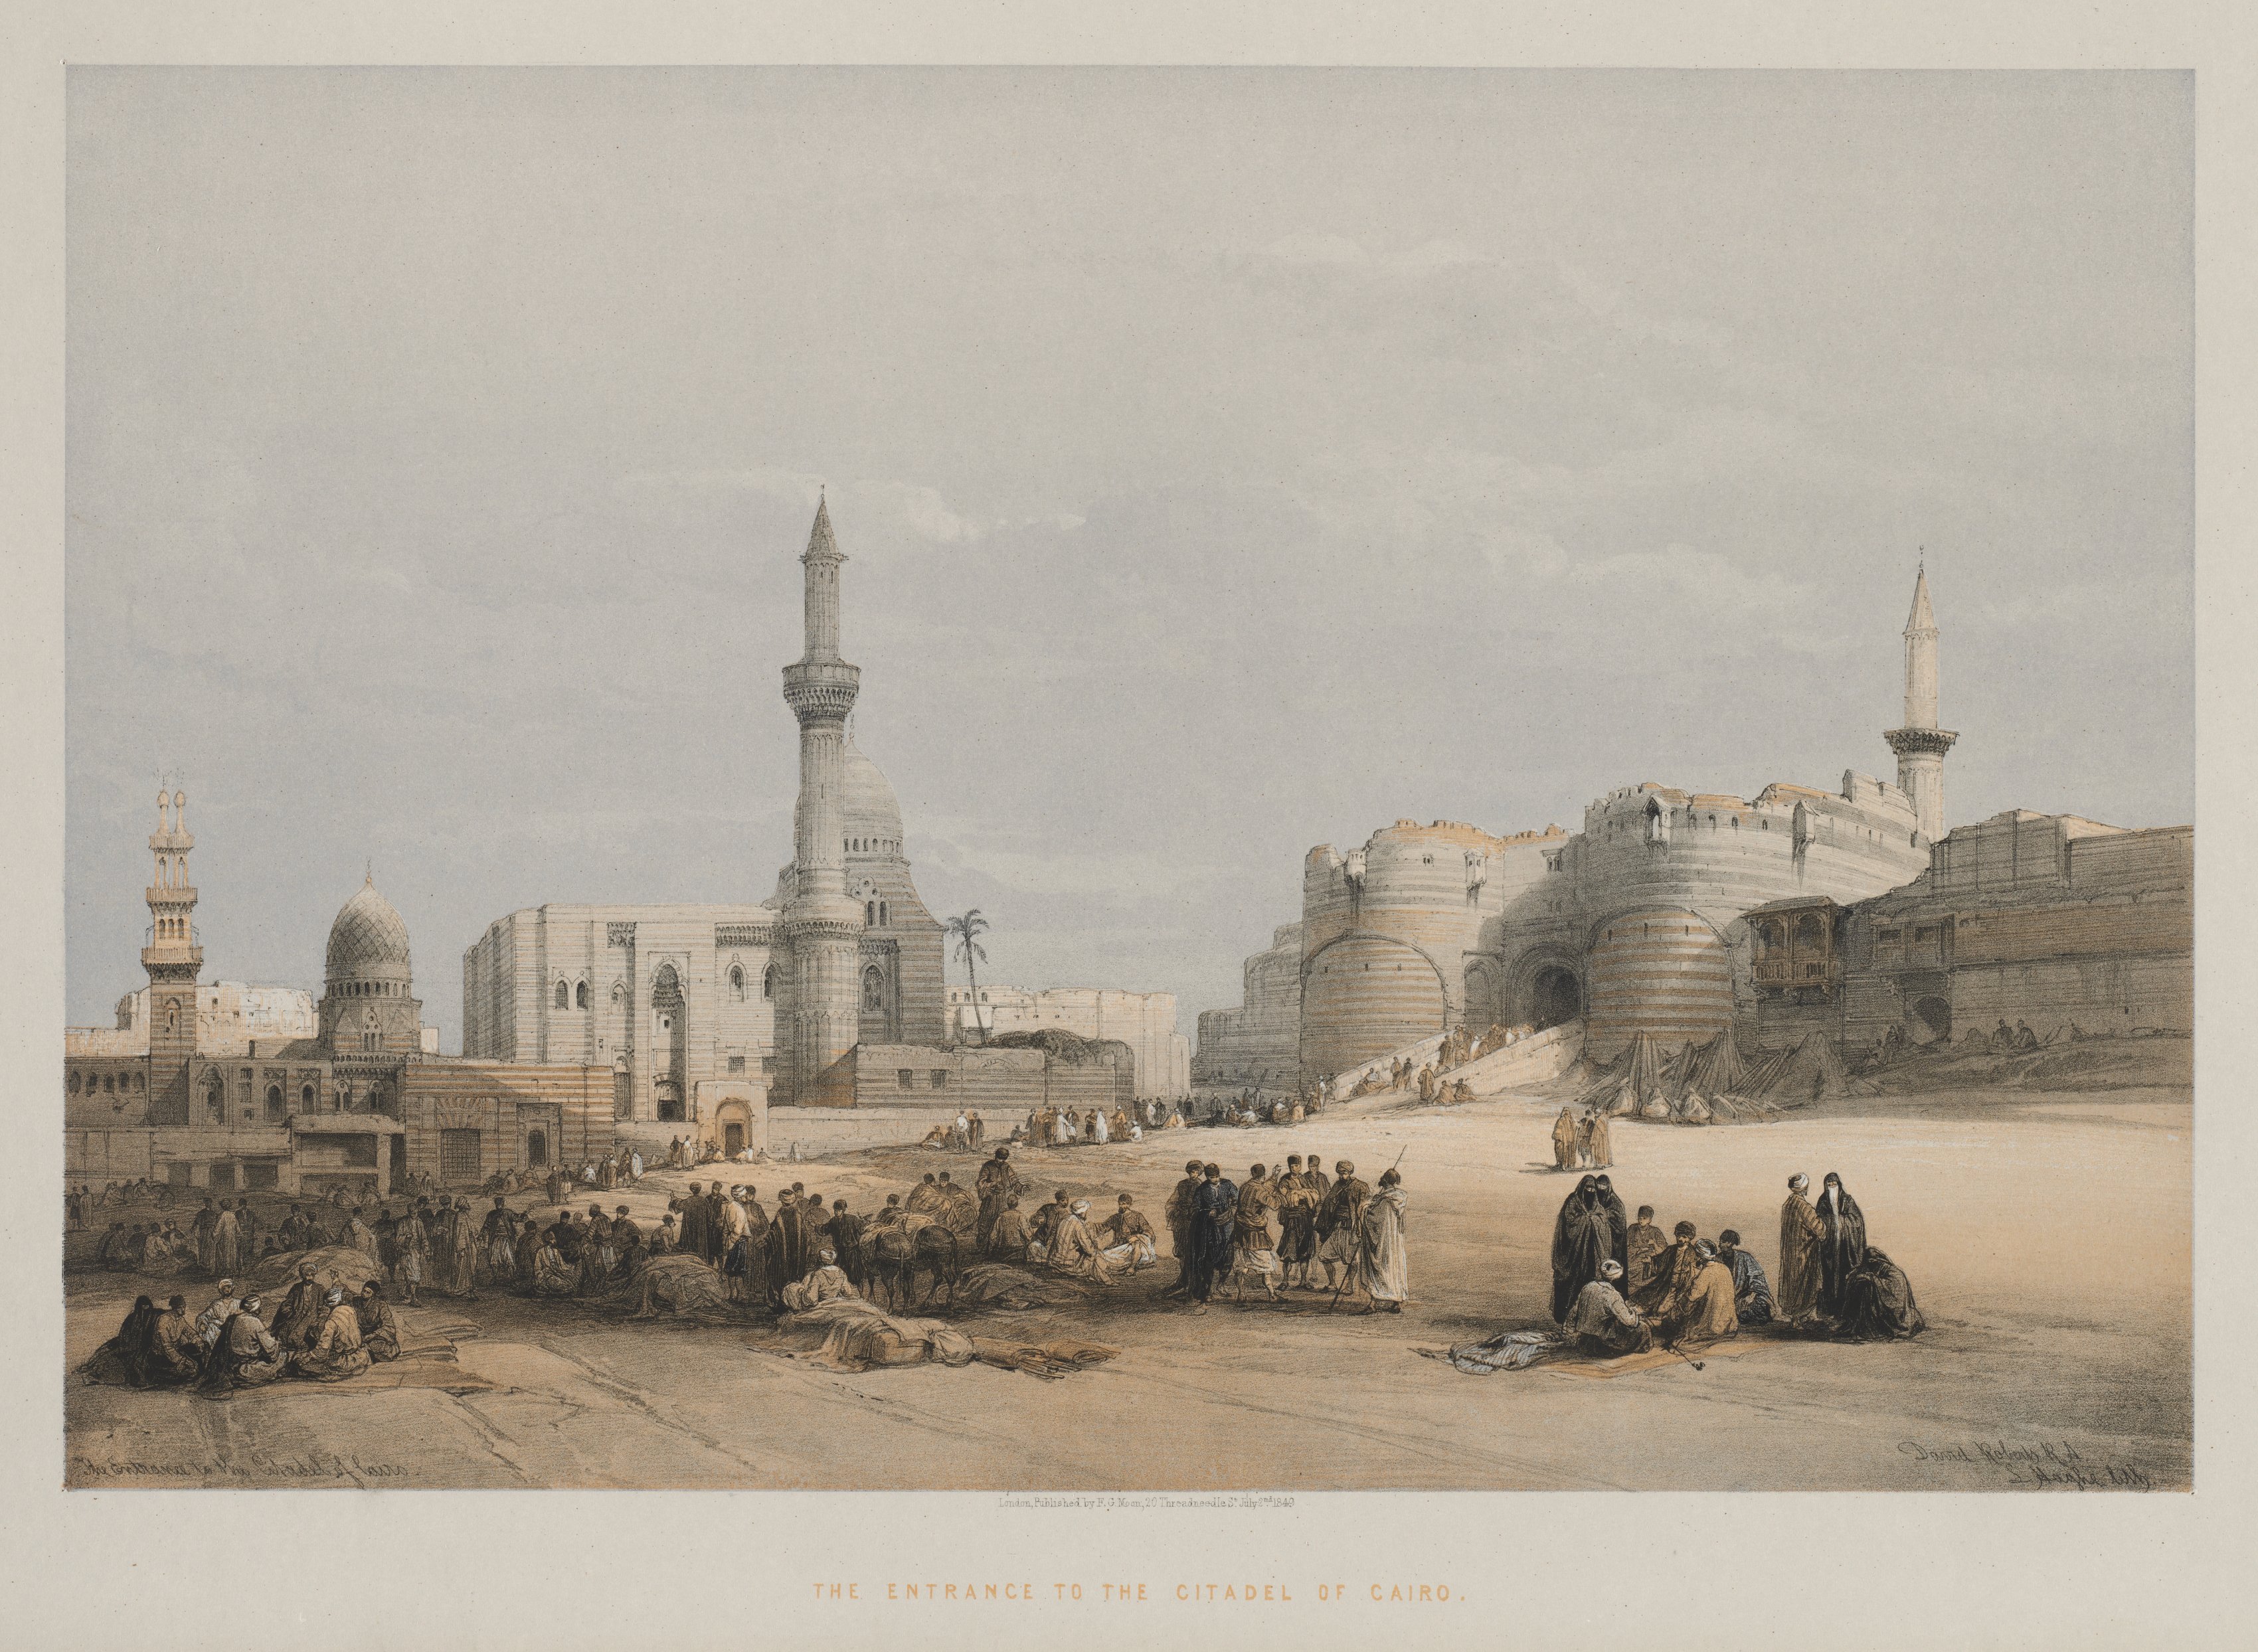 Egypt and Nubia, Volume III: The Entrance to the Citadel of Cairo